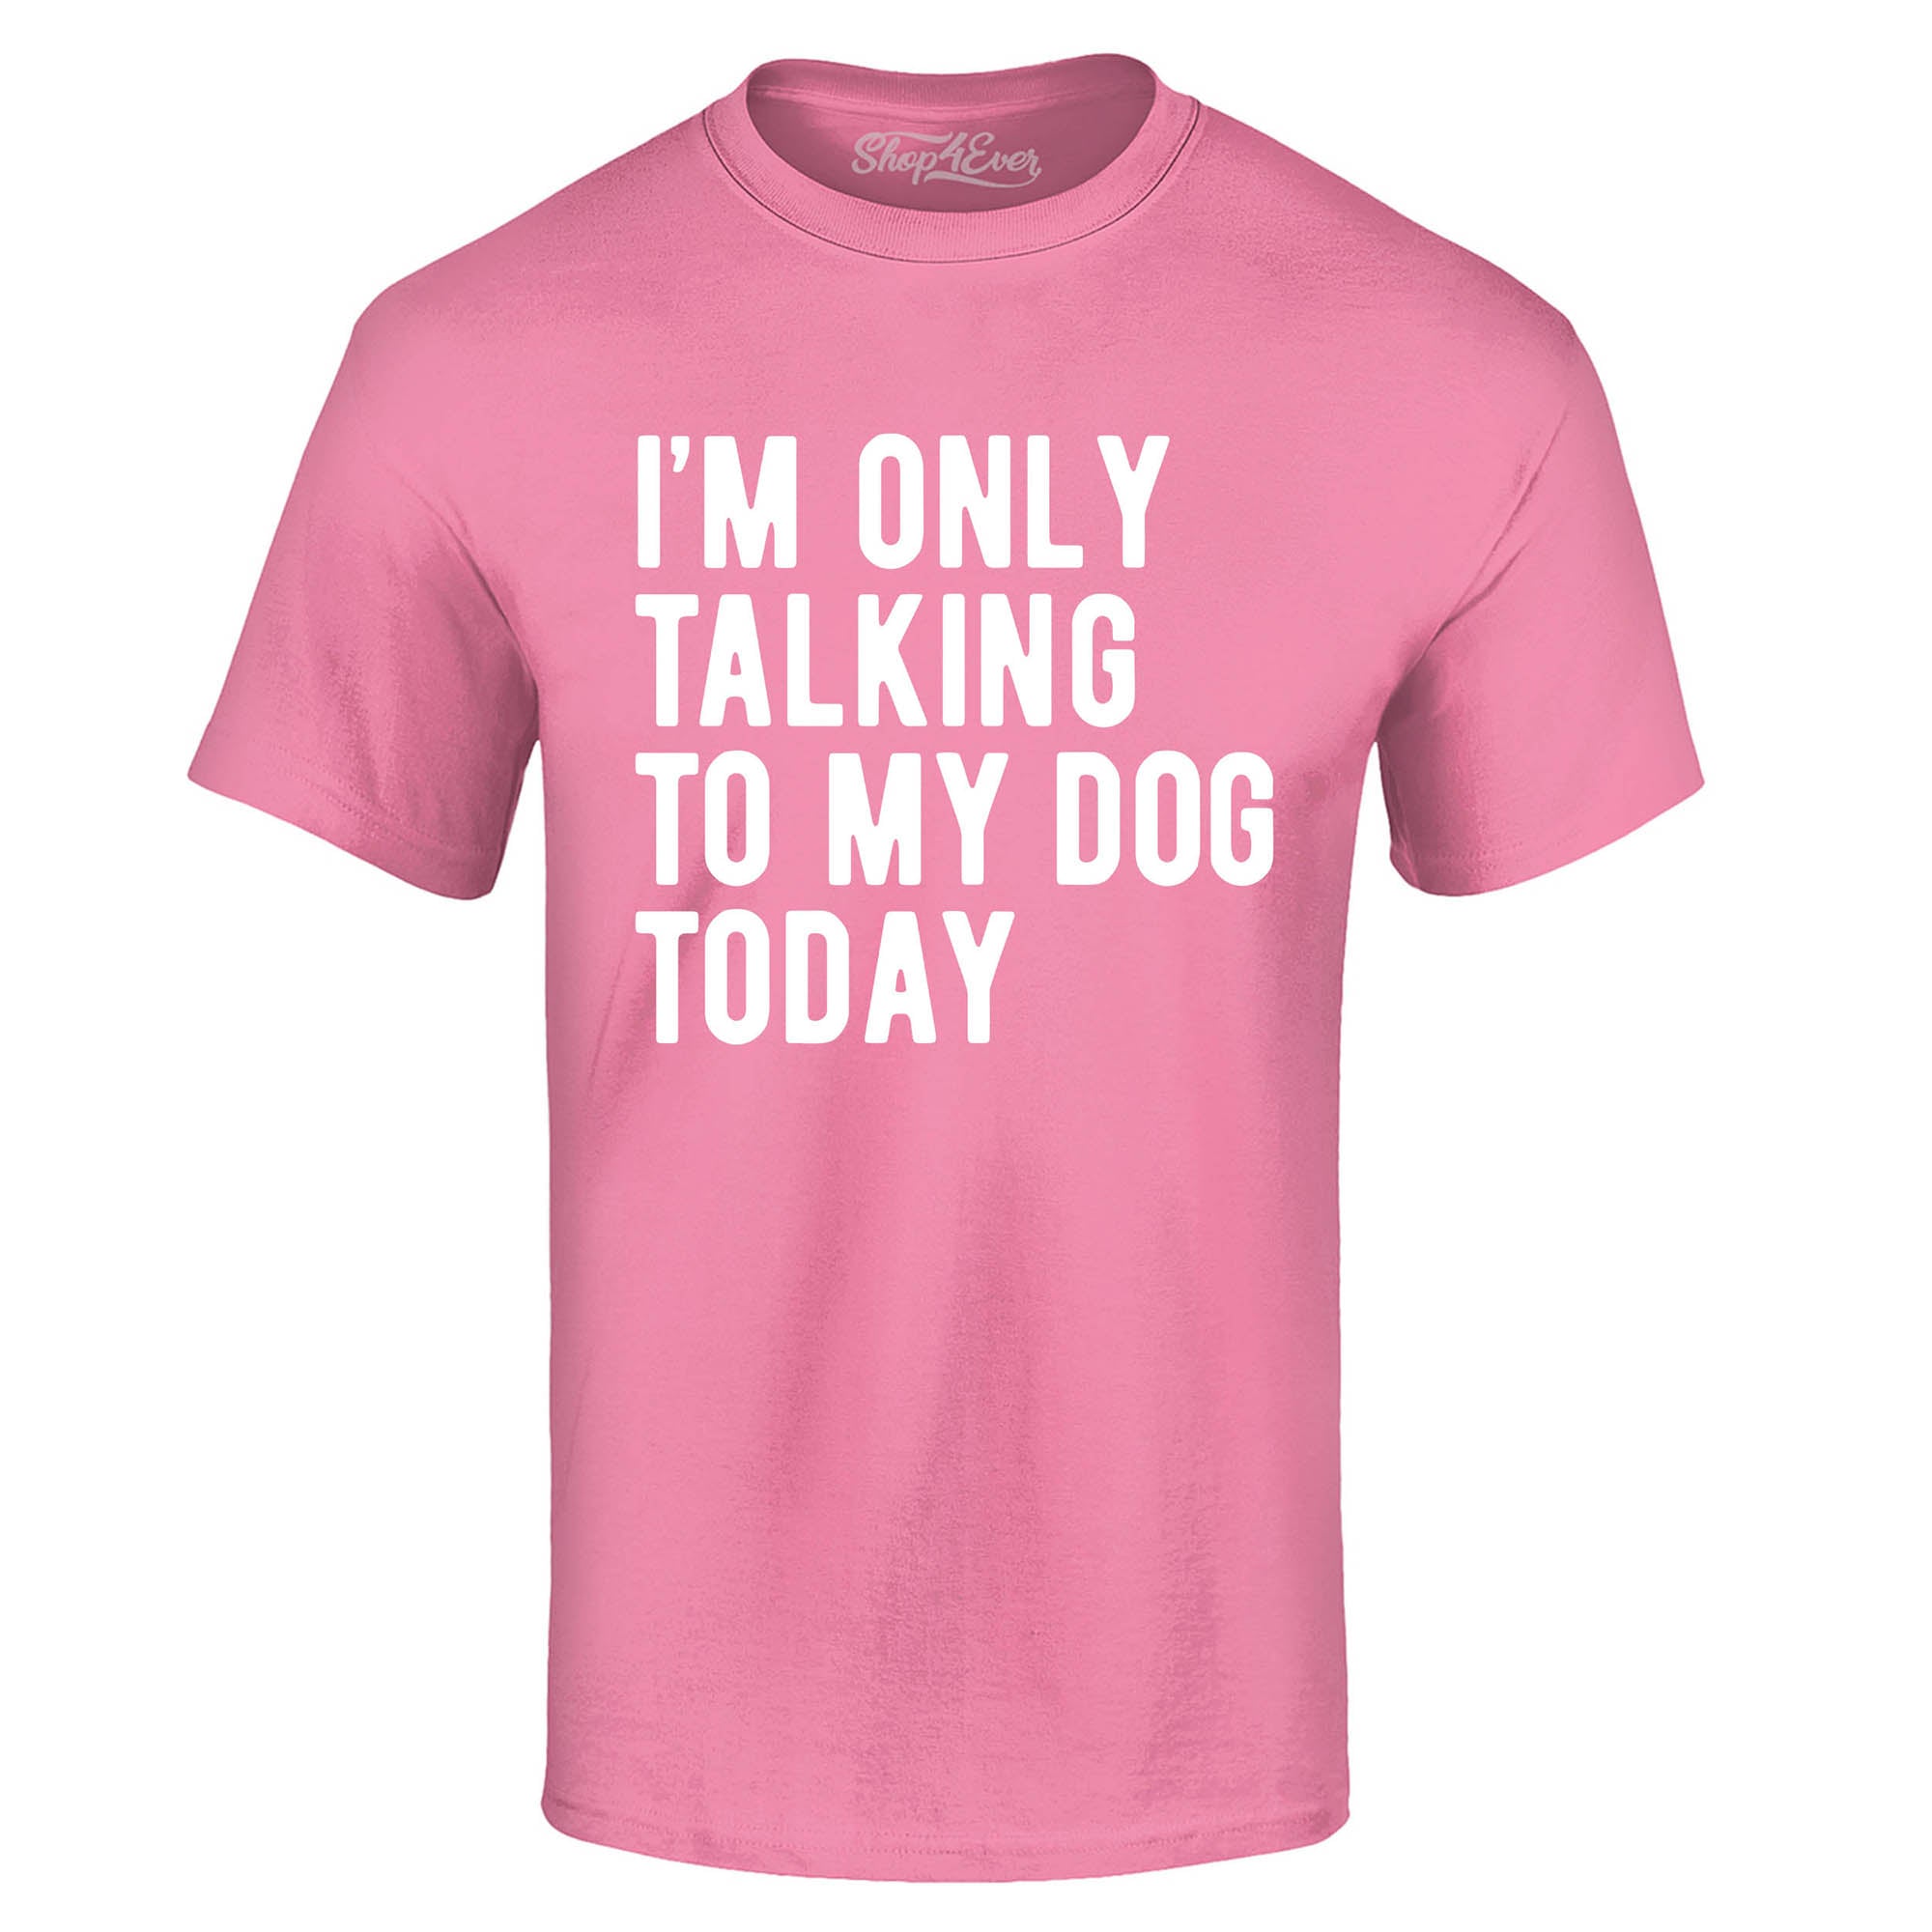 I'm Only Talking to My Dog Today T-Shirt